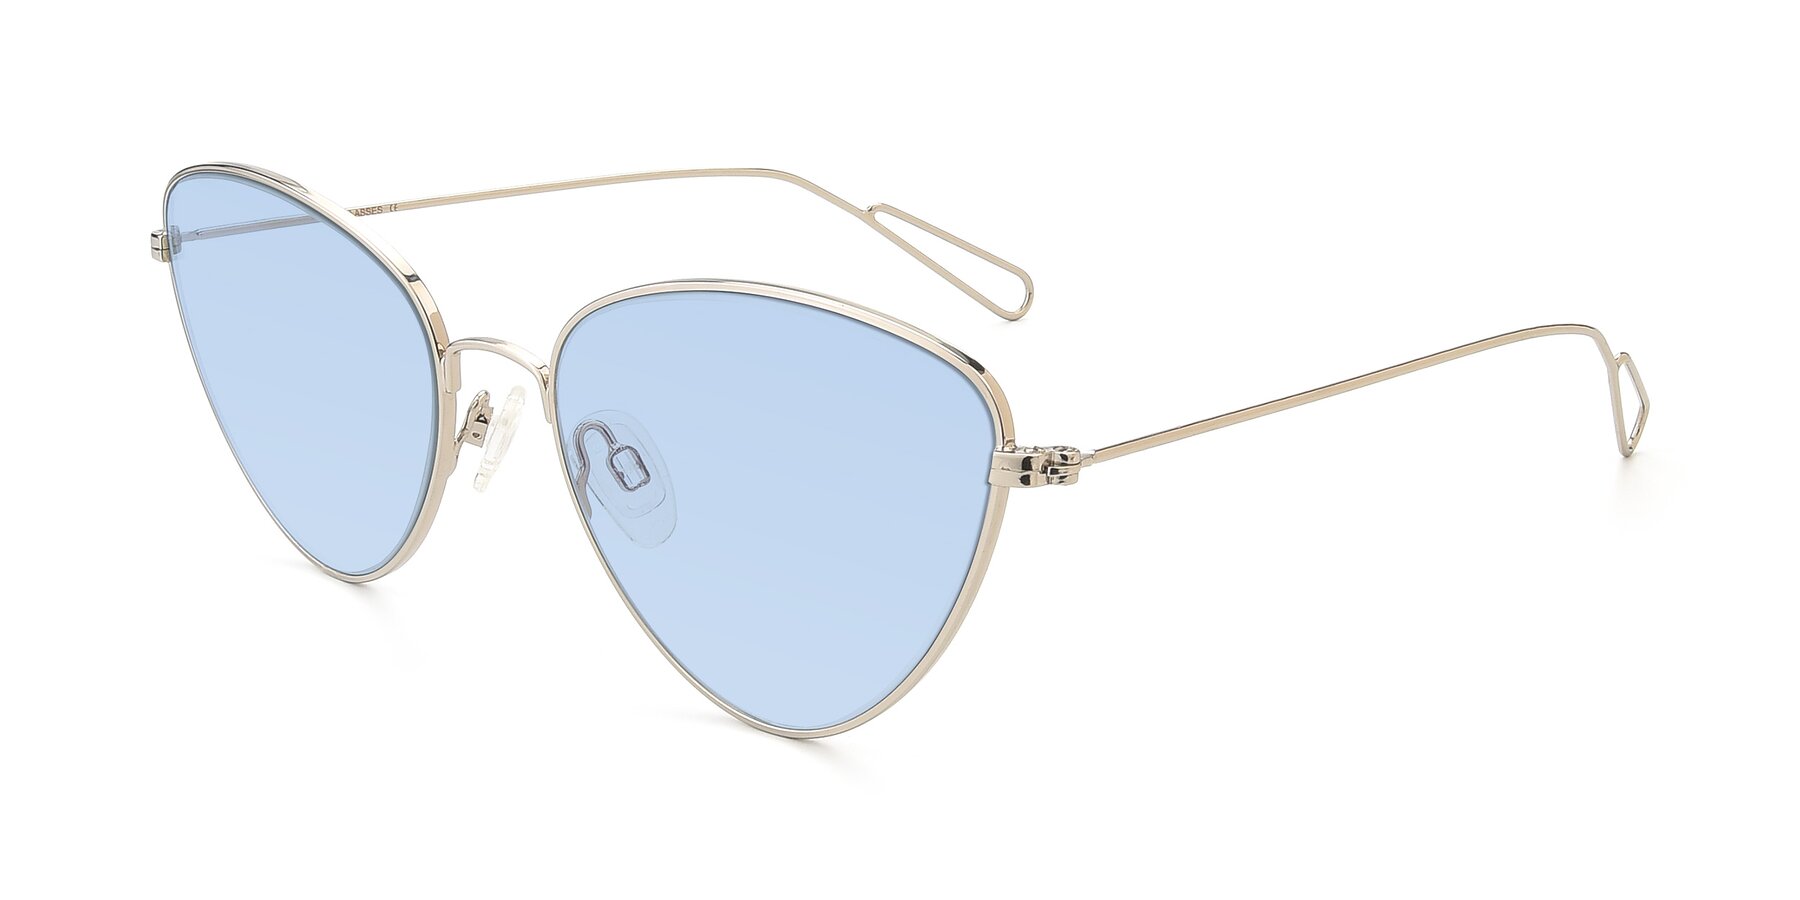 Angle of Butterfly Effect in Silver with Light Blue Tinted Lenses